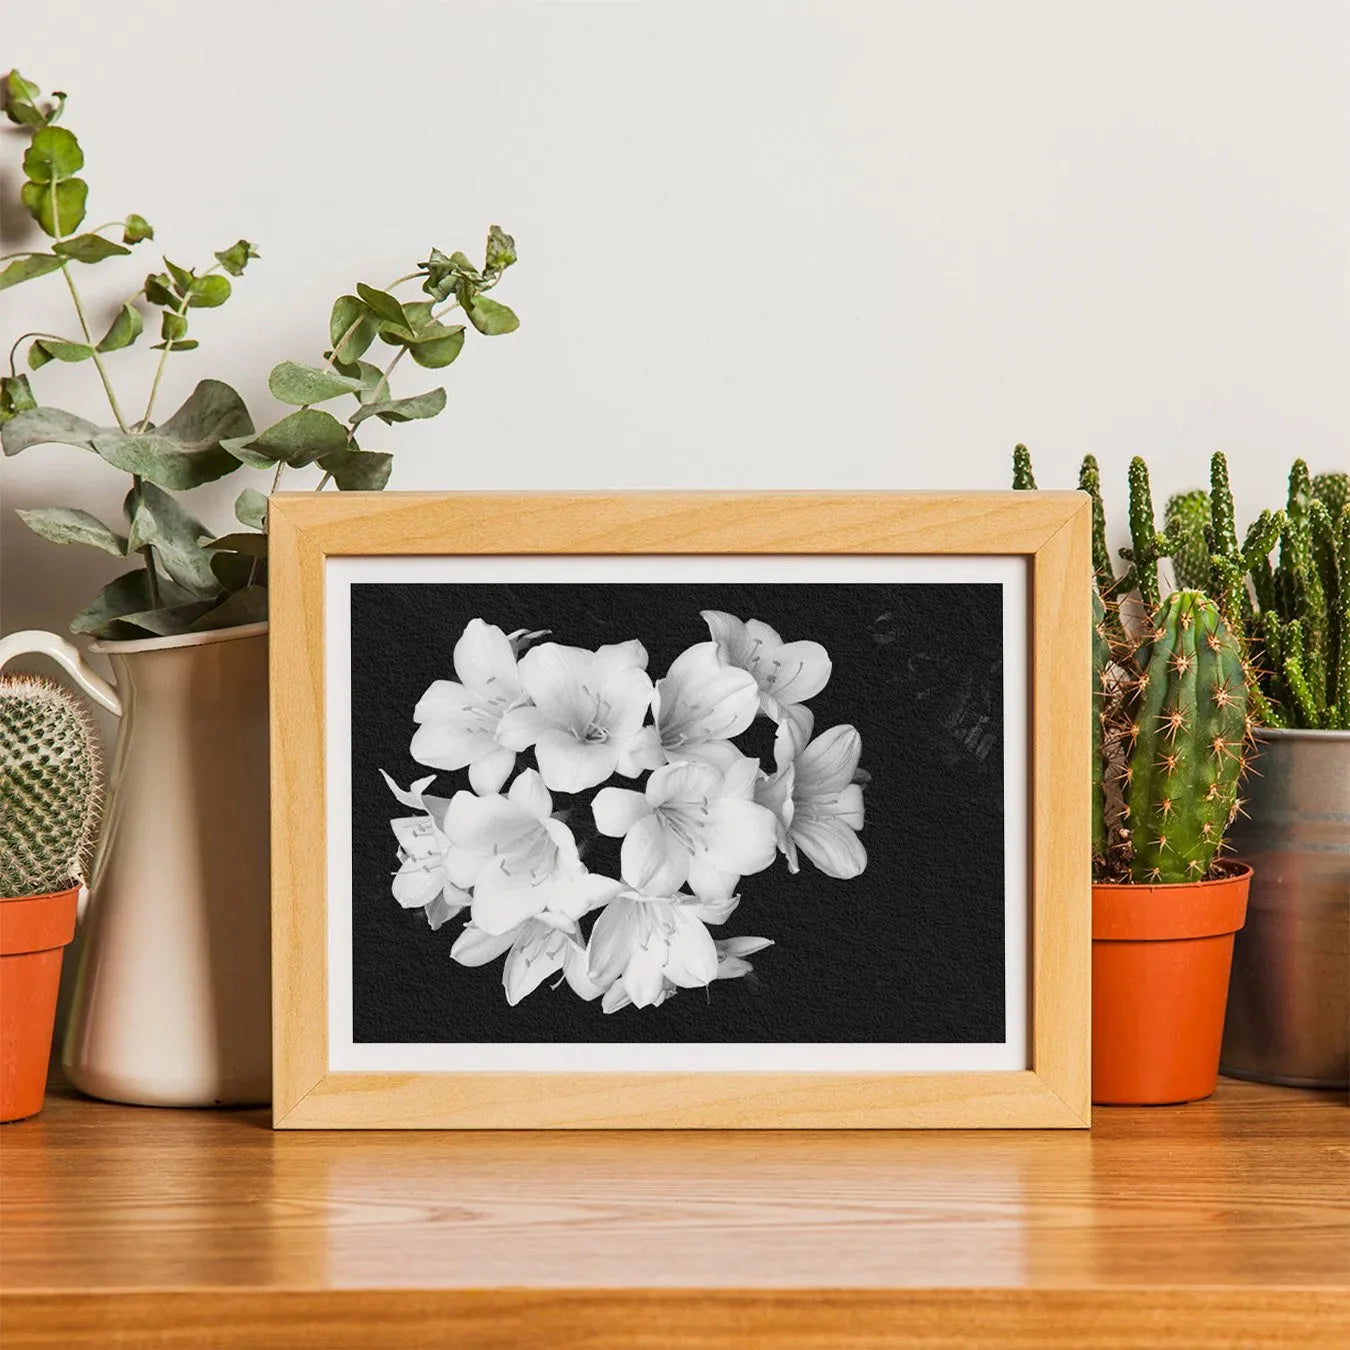 Flower Power 2 + Too Giclée Print - black And White Wall Art - 8×10 - Posters Prints & Visual Artwork - Aesthetic Art